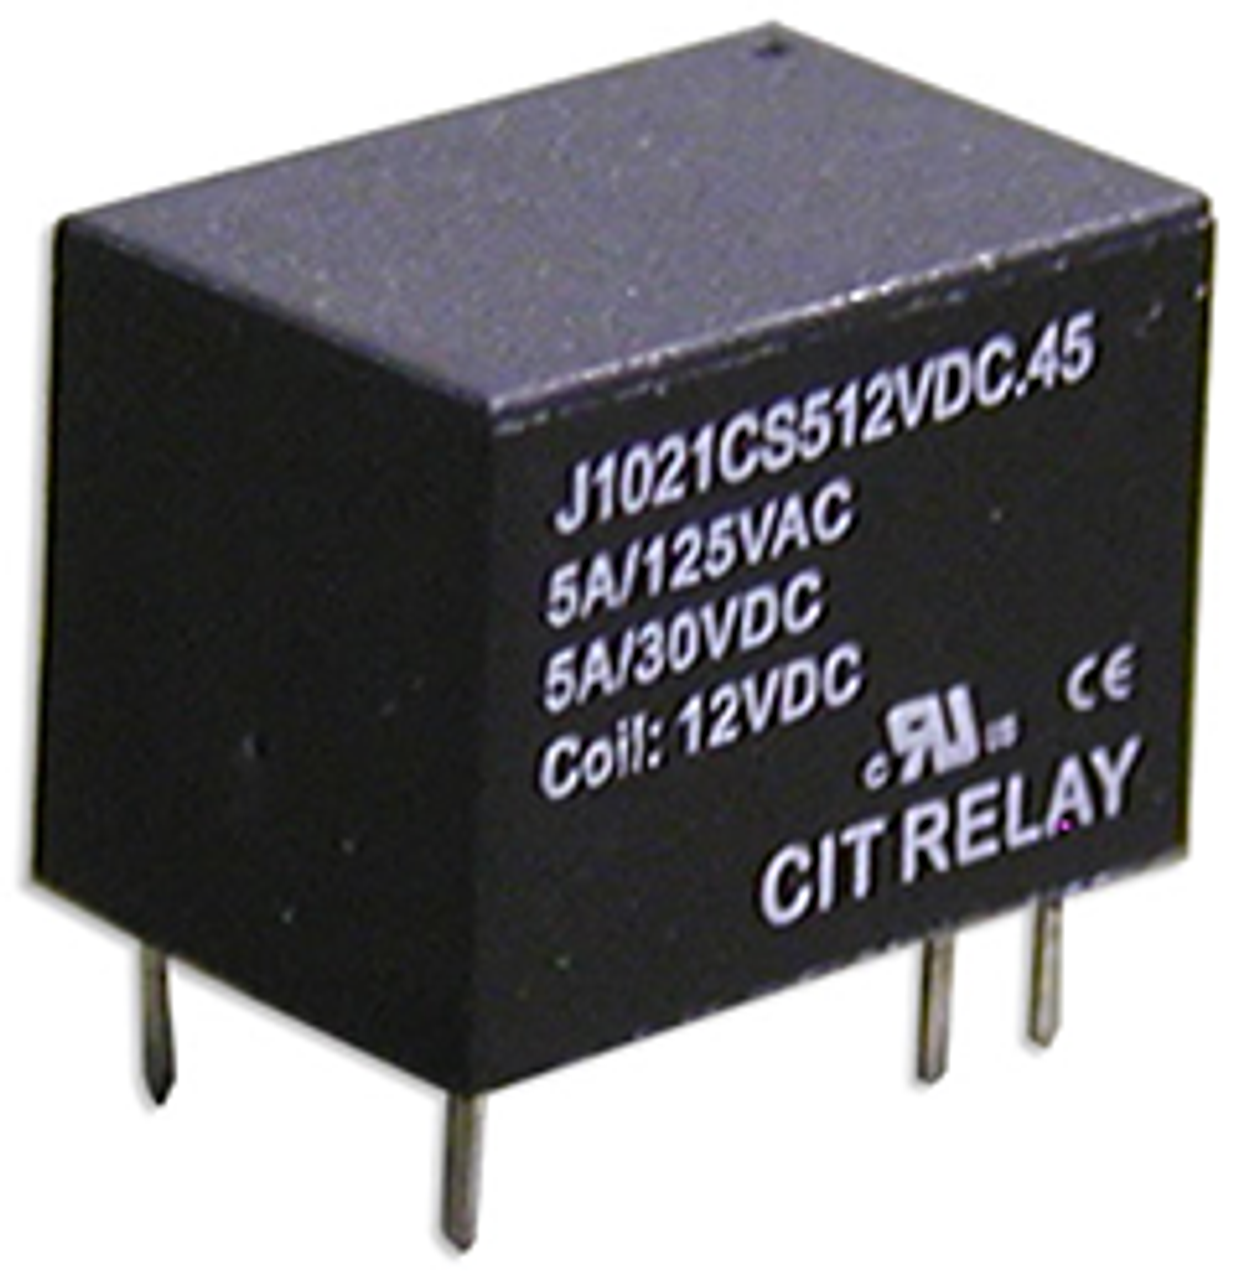 CIT Relay and Switch J1021BS16VDC.45 Signal Relays